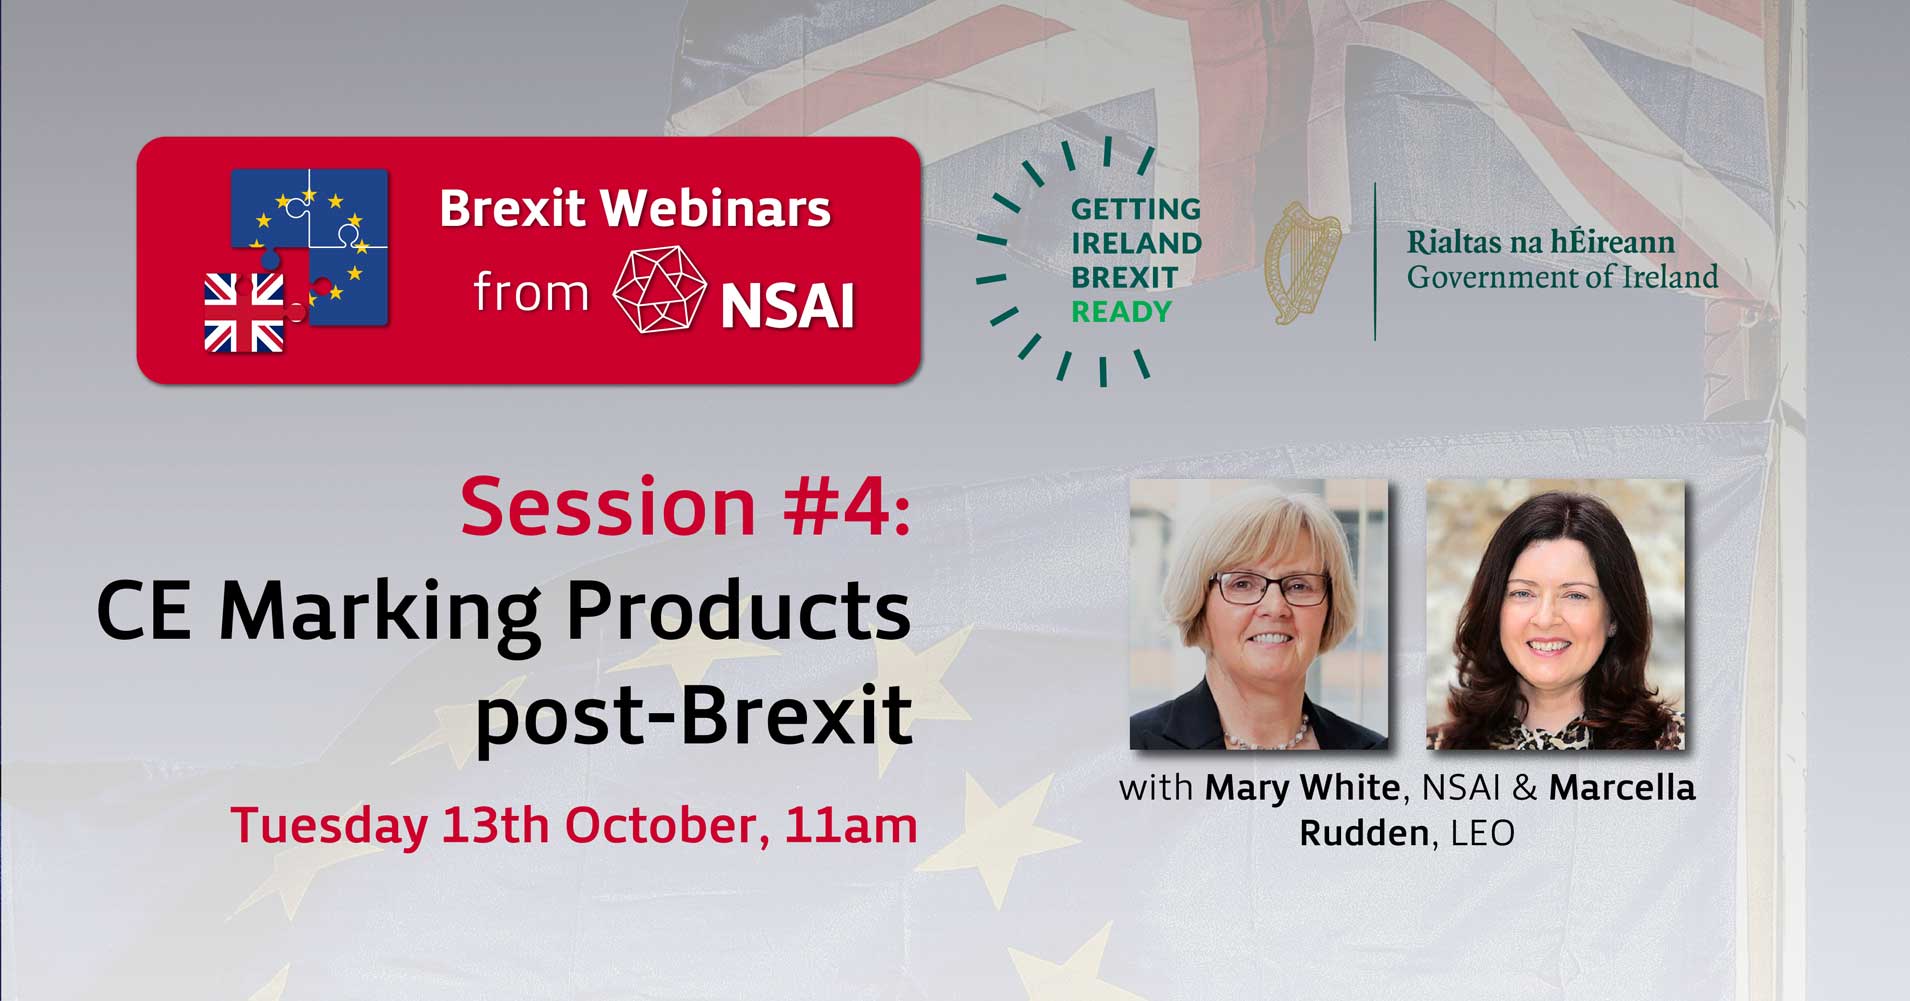 Brexit Webinars from NSAI Session #4: CE Marking Products post-Brexit with Mary White, NSAI & Marcella Rudden, LEO Tuesday 13th October, 11am